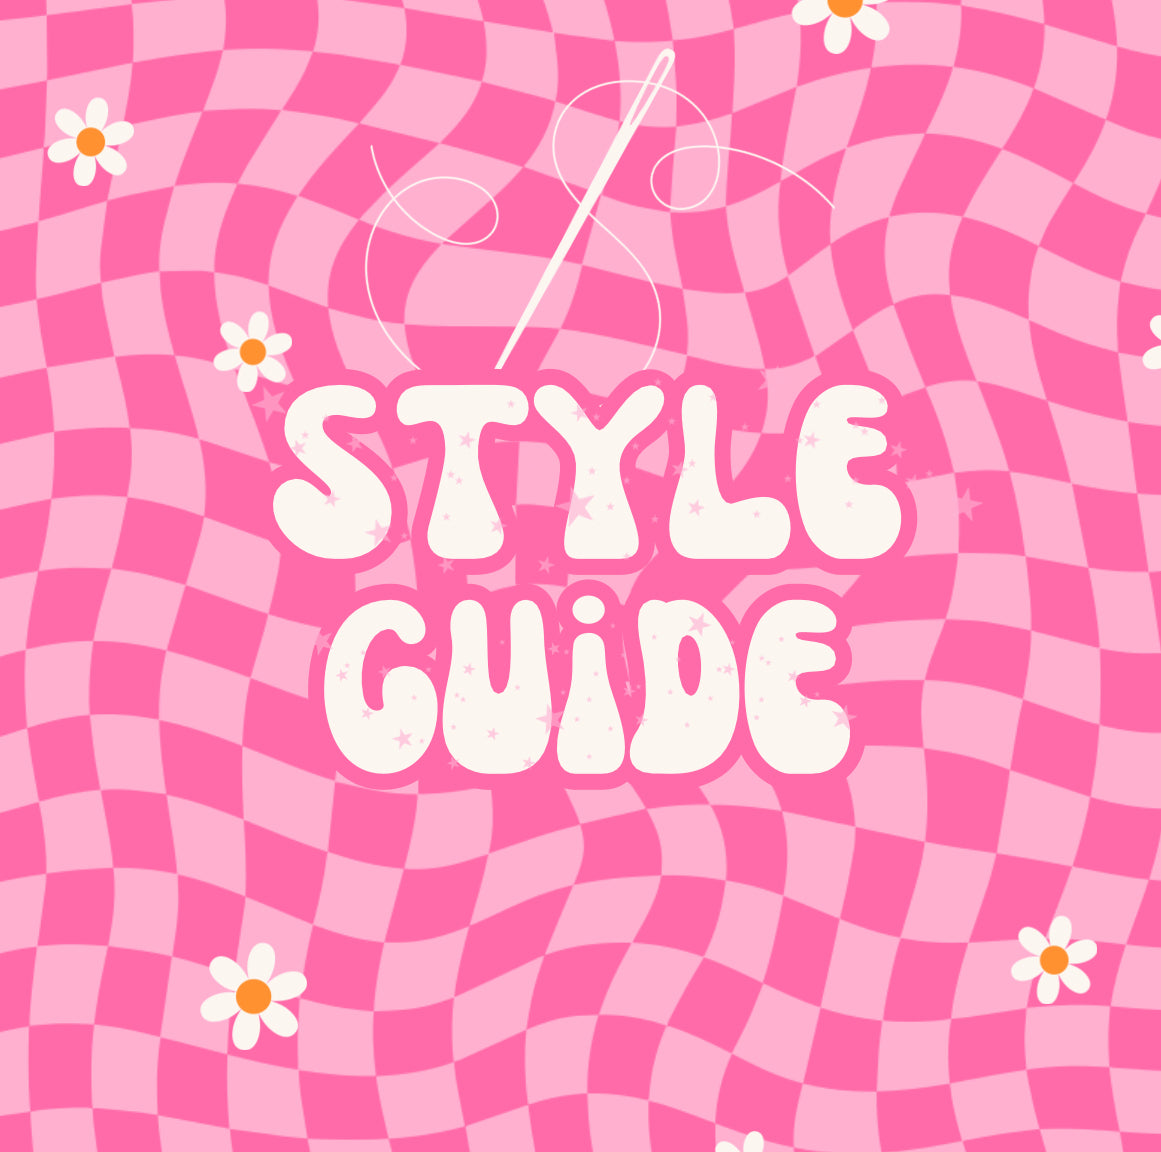 Style Guide